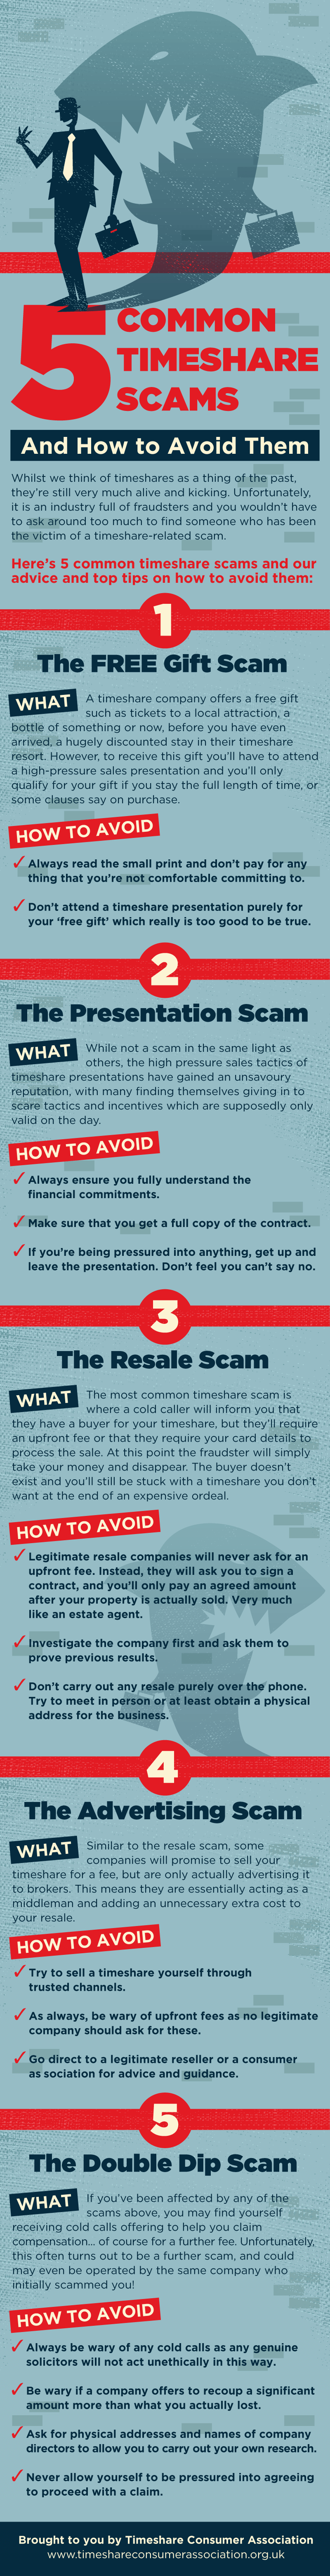 5 Common Timeshare Scams &#038; How To Avoid Them [Infographic]